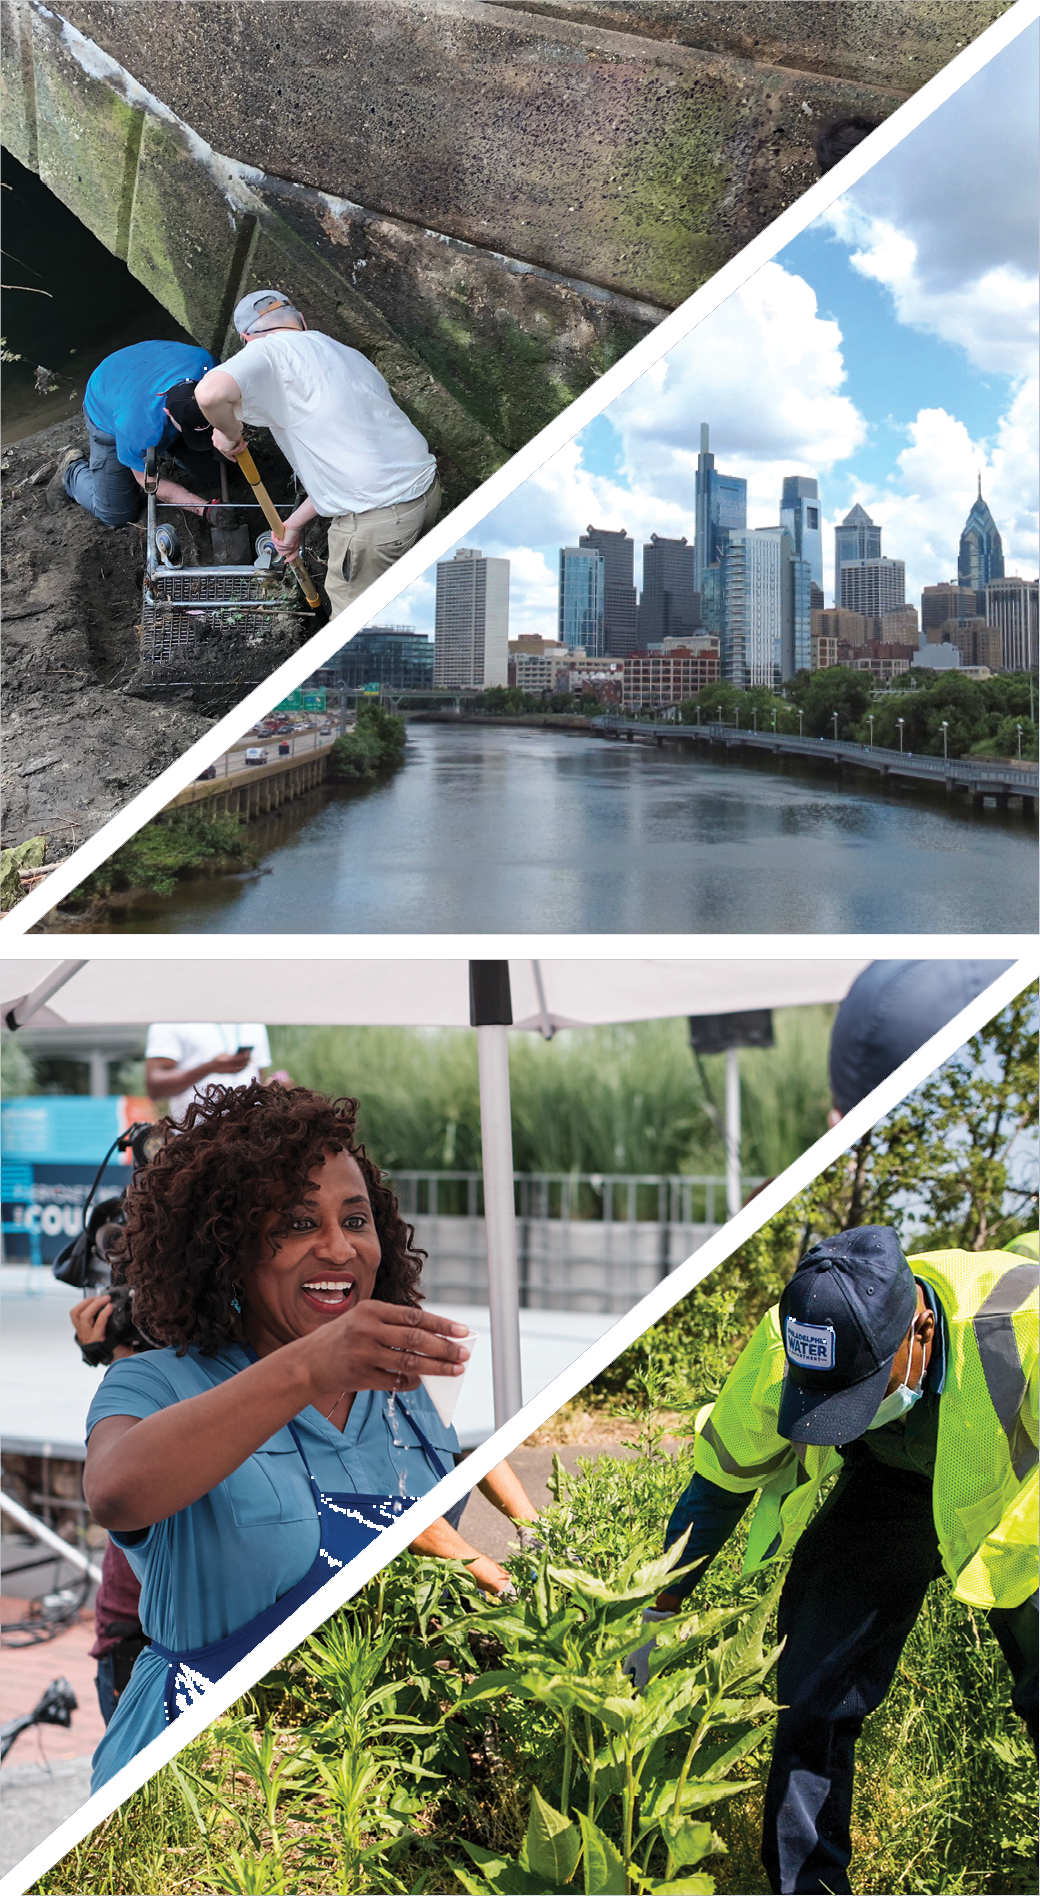 divided into four triangles: 1. Two people digging a cart out of the silt in a creak bed, under an arched concrete bridge during a volunteer cleanup. 2. A view looking out over the Schuylkill River towards the city. 3. PWD Public Relations Manager Laura Copeland serving cold, refreshing, Philly tap water at a Philly Water Bar event. 4. A PWD employee in a blue hat and yellow safety vest tending to plants in a Stormwater Basin.